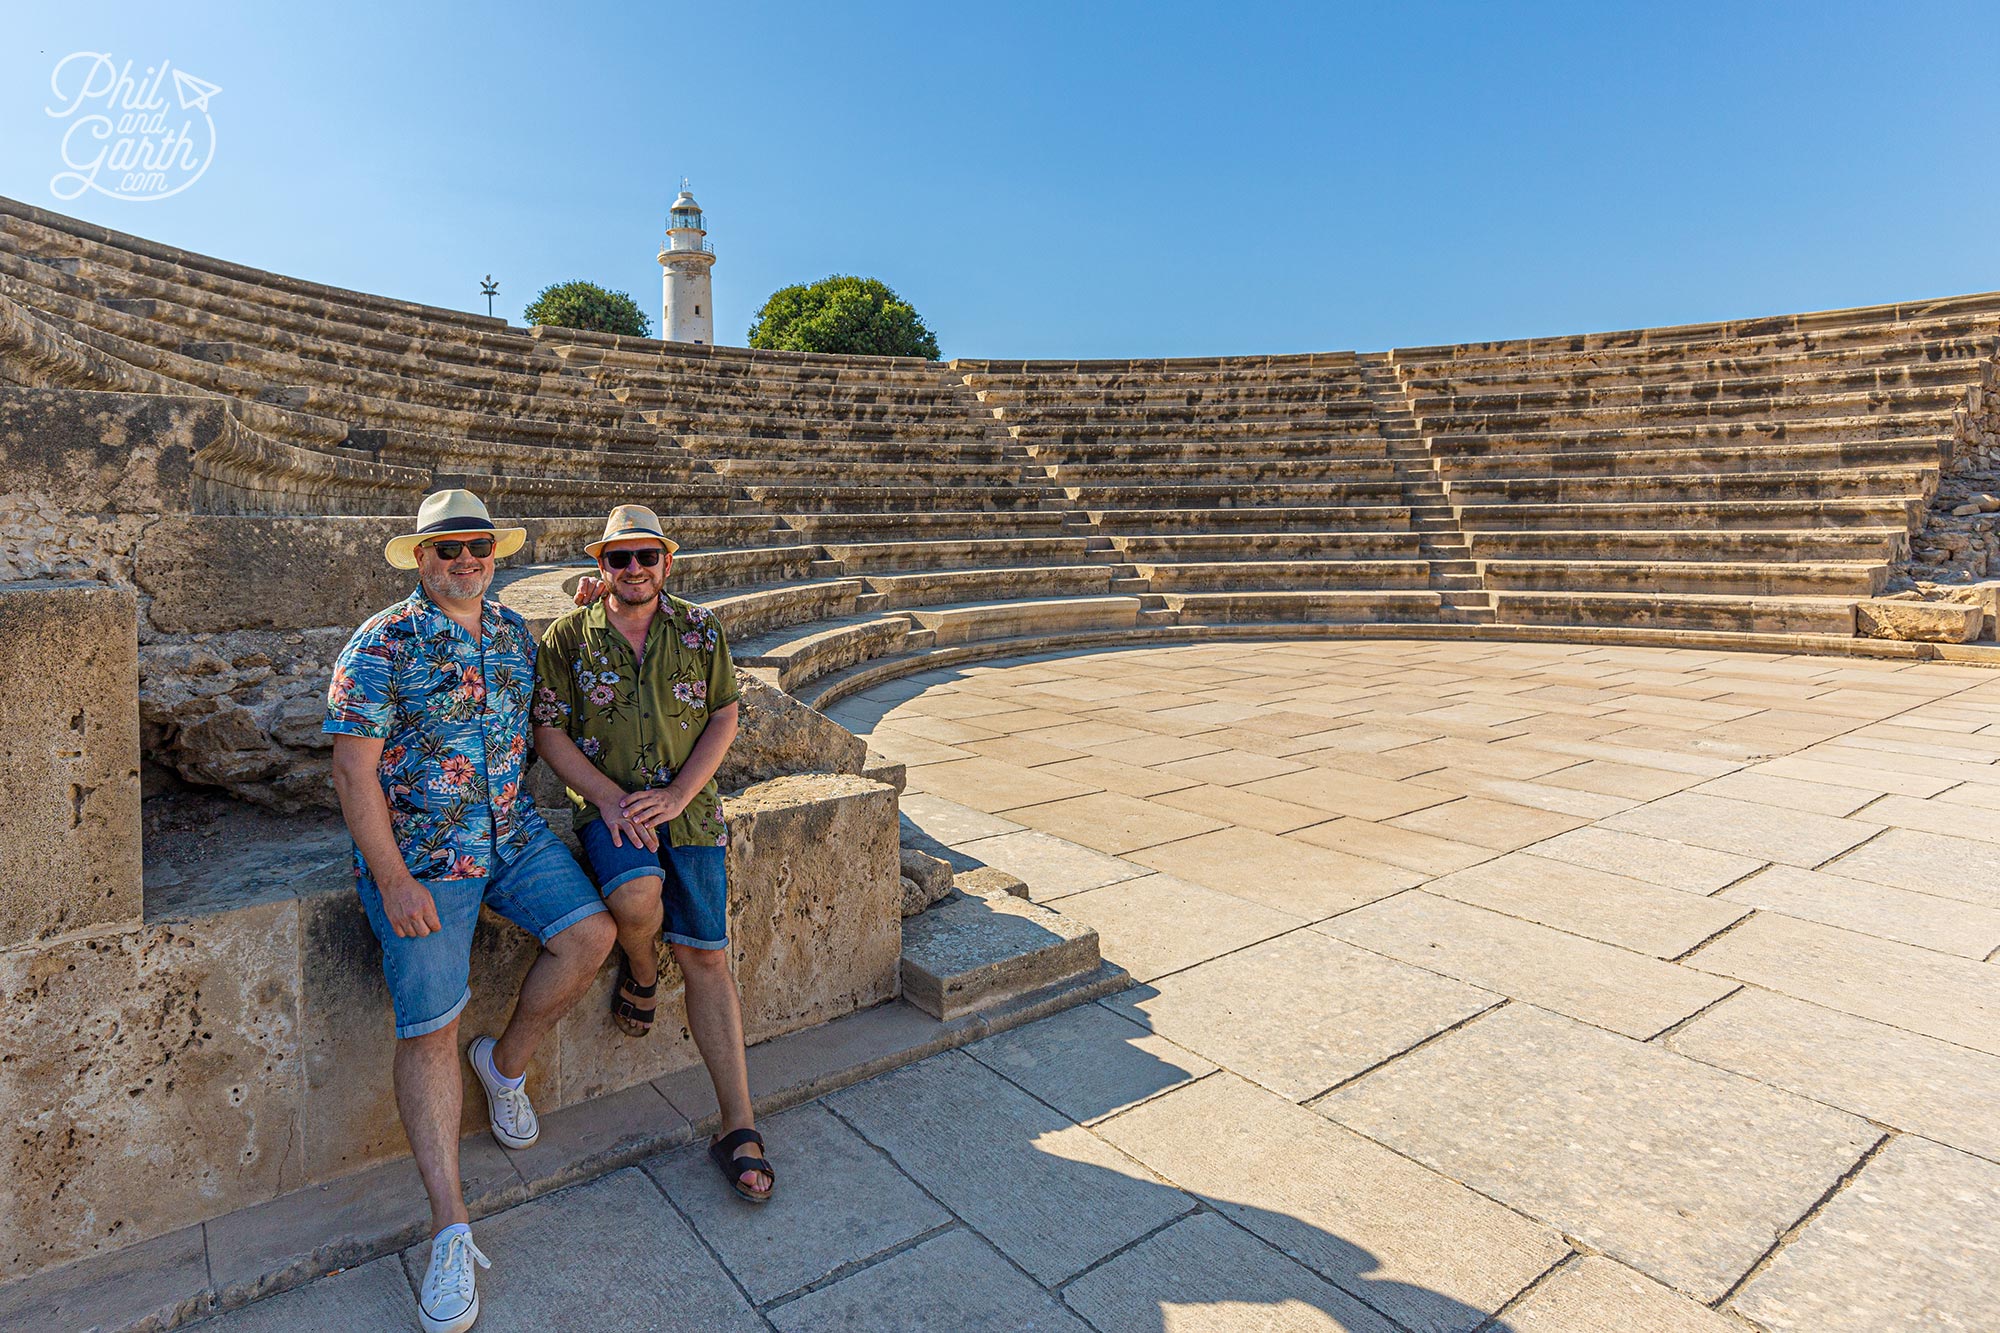 Phil and Garth sat in the Odeon Paphos Cyprus